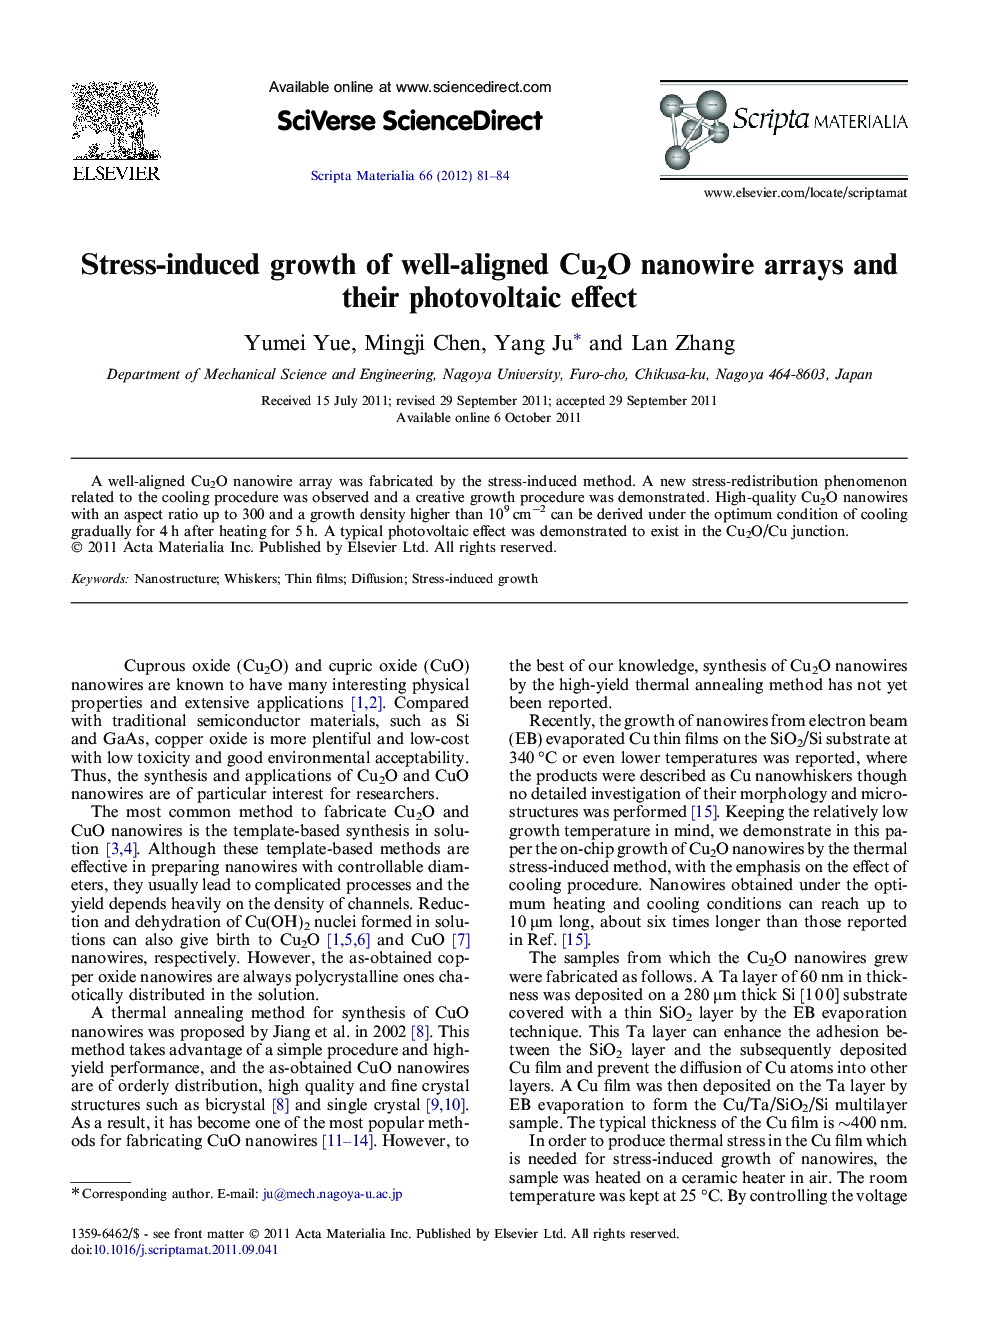 Stress-induced growth of well-aligned Cu2O nanowire arrays and their photovoltaic effect